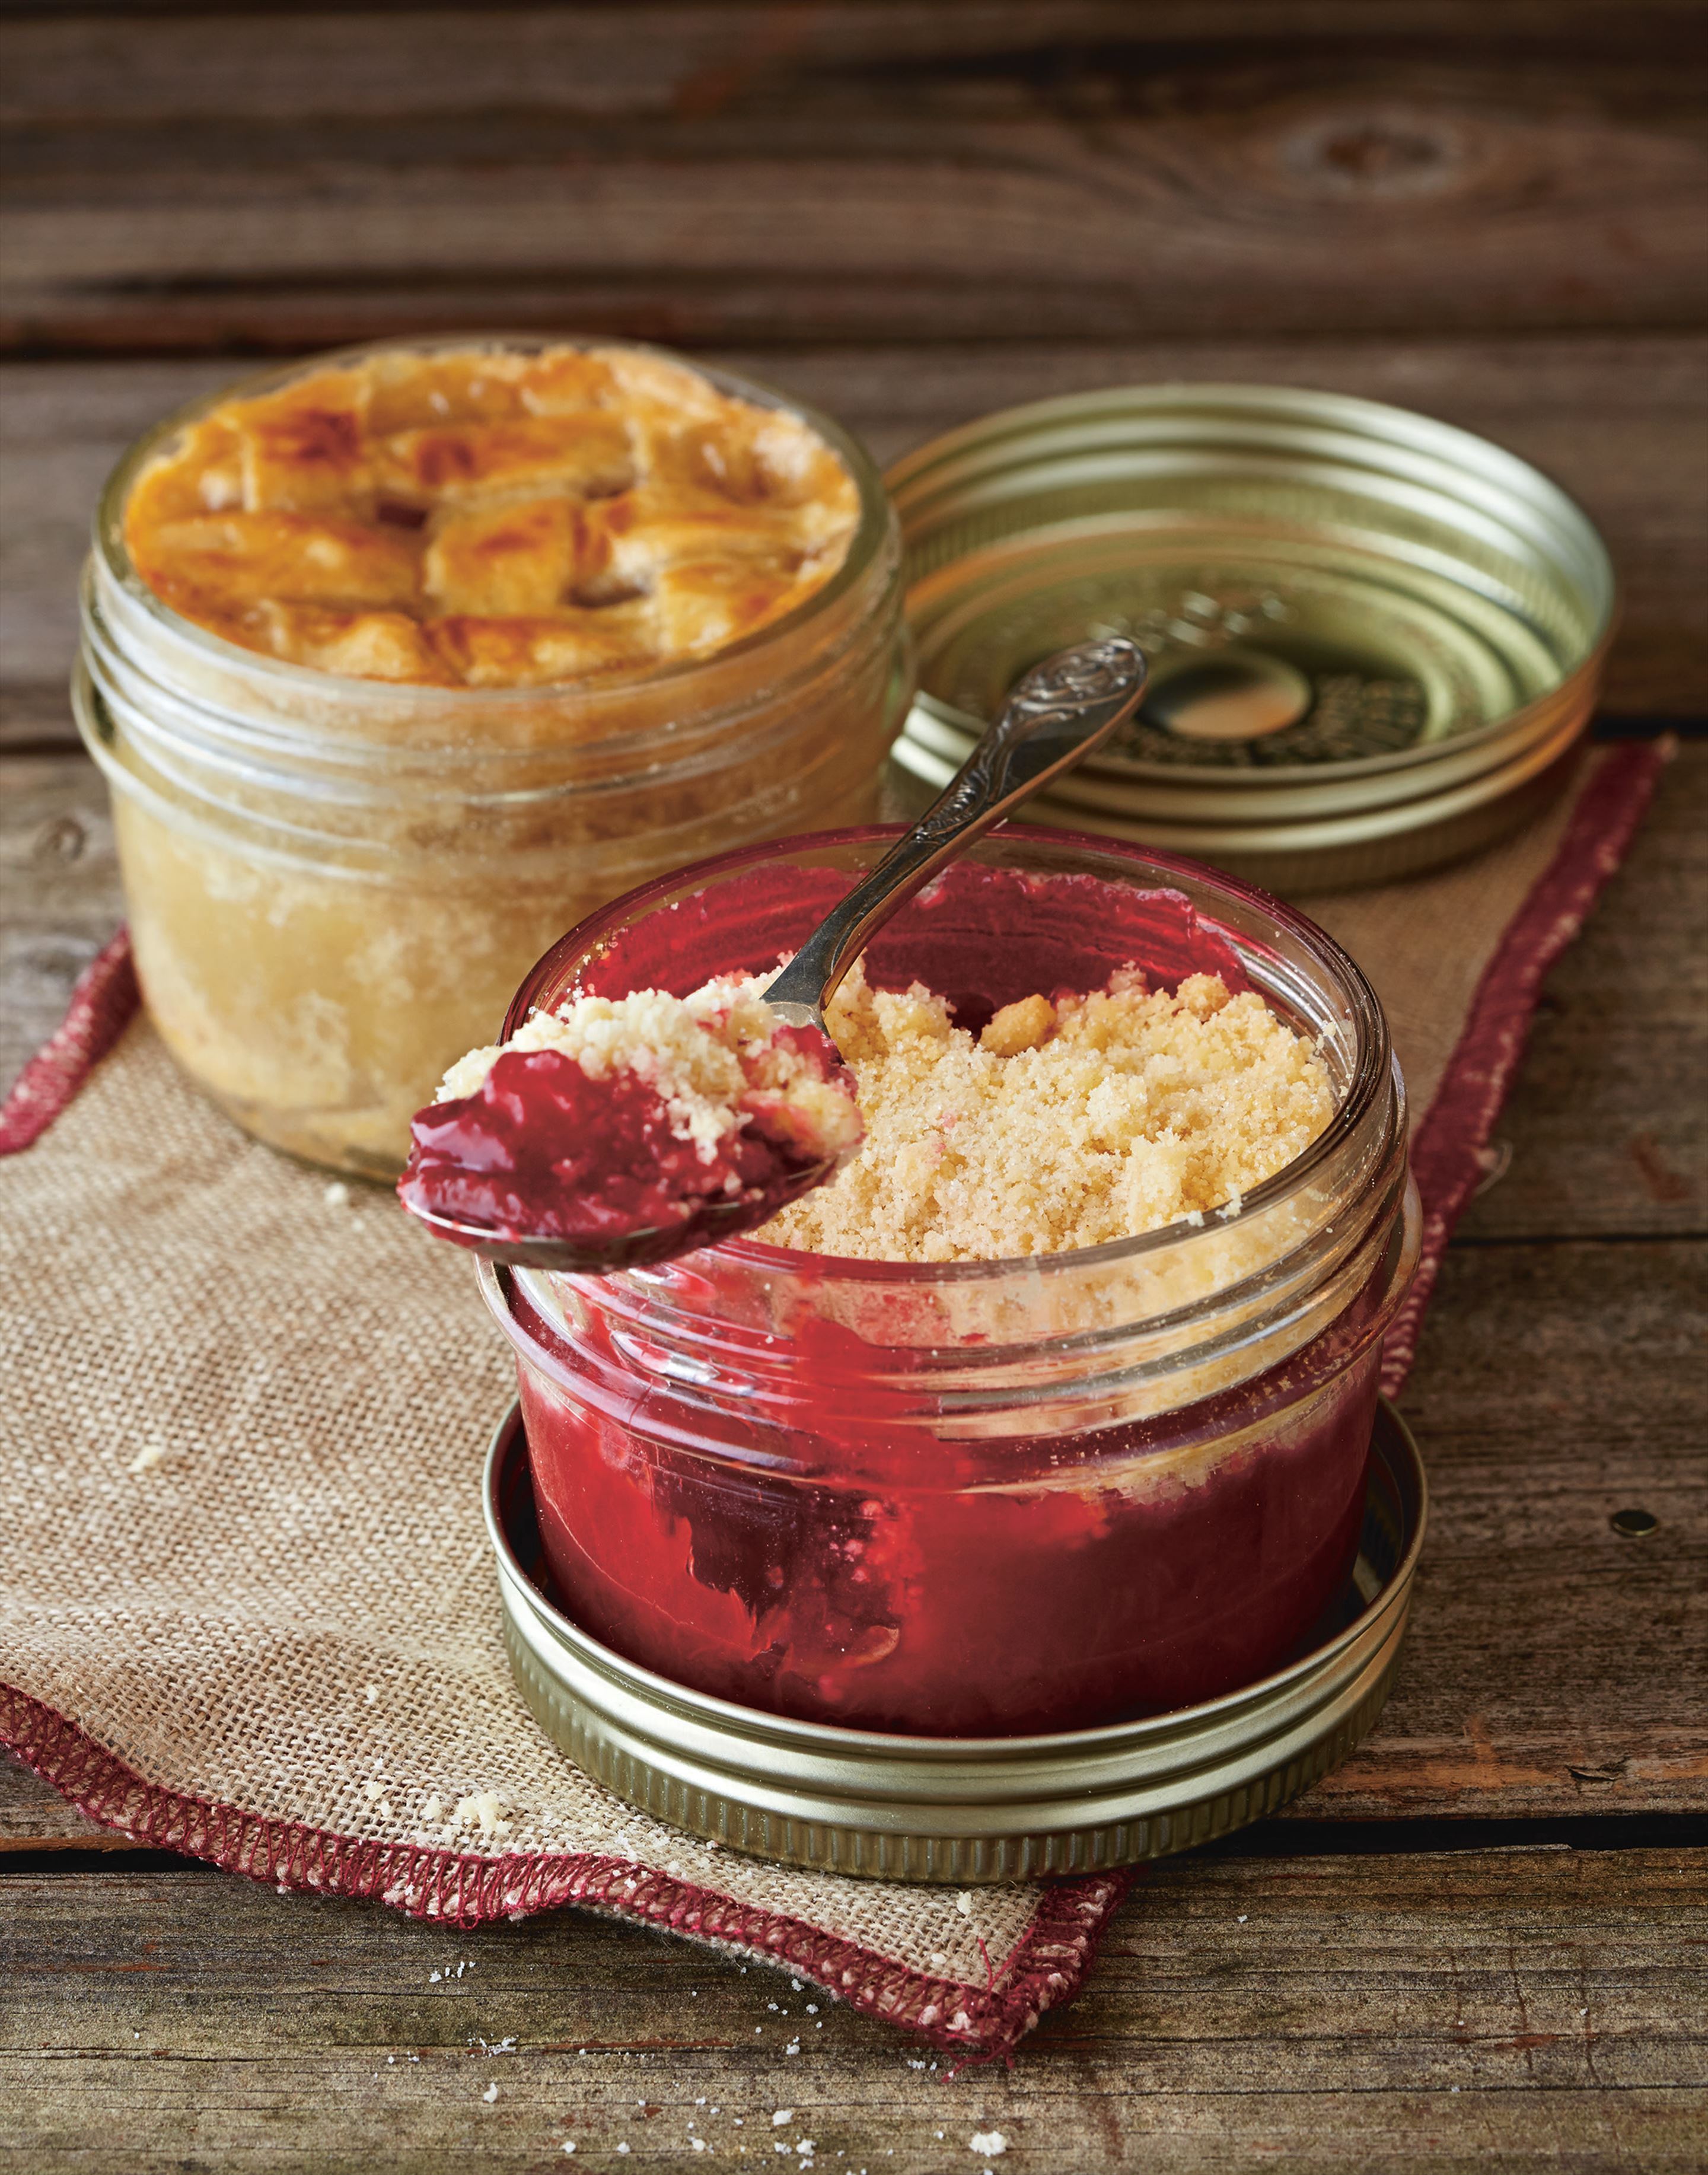 Plum crumble in a jar and apple pie in a jar